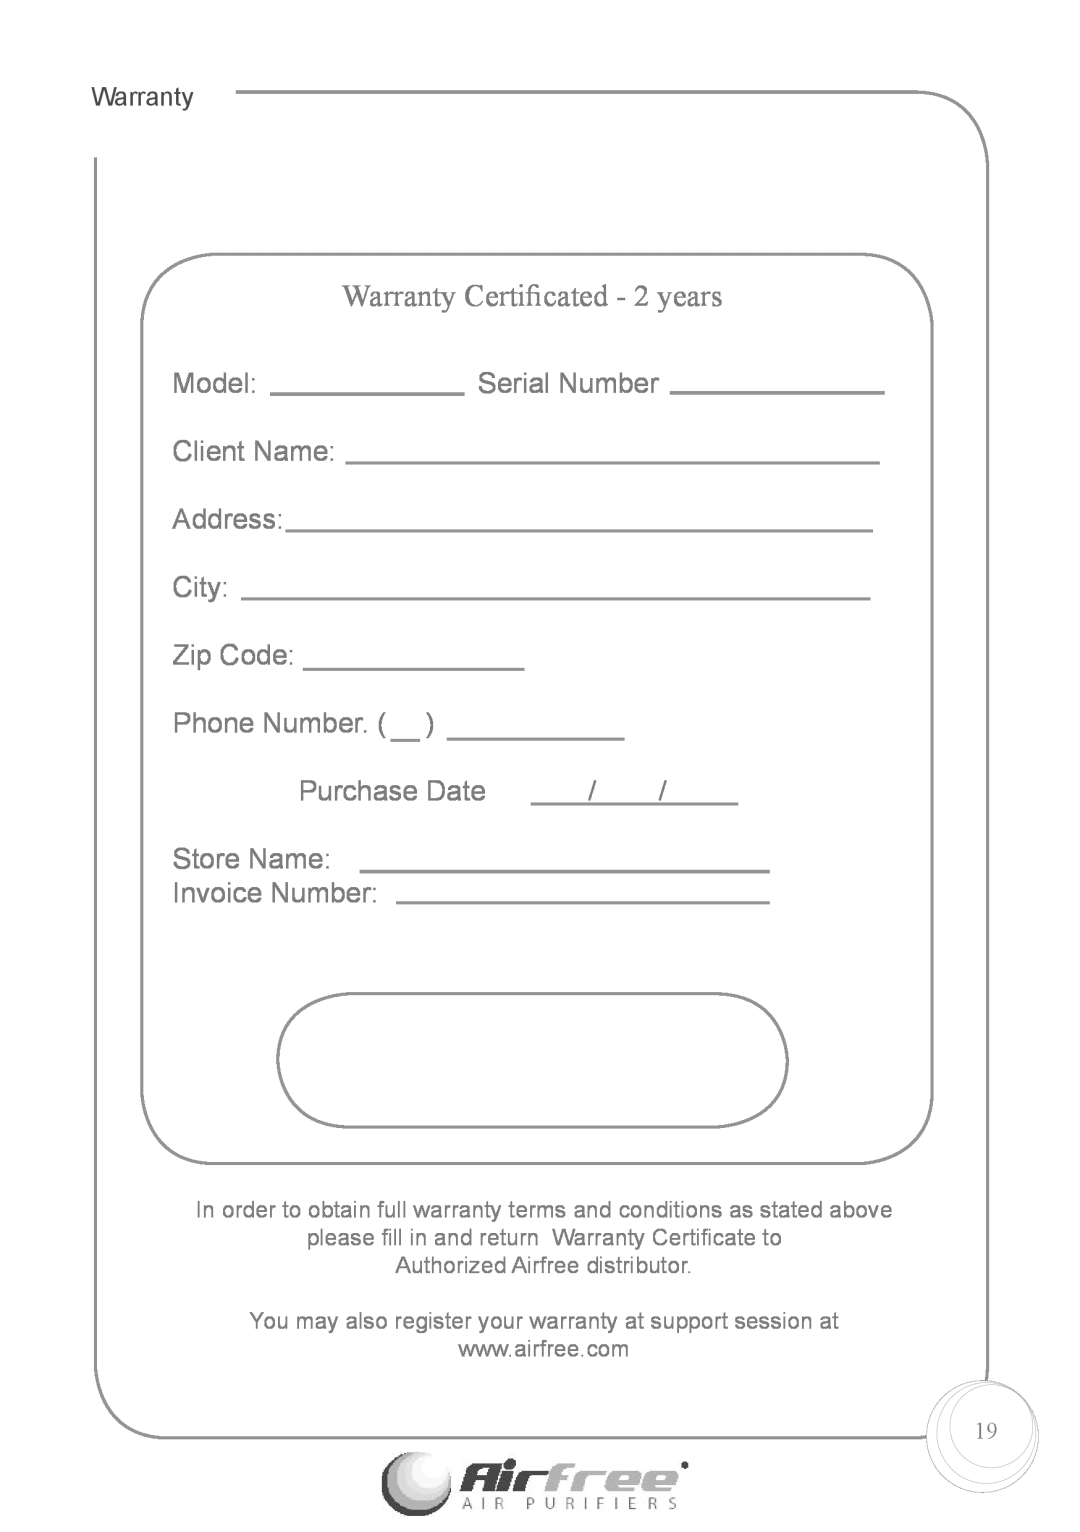 Airfree Enviro 60 Warranty Certiﬁcated - 2 years, Model, Serial Number, Client Name Address City, Zip Code, Phone Number 